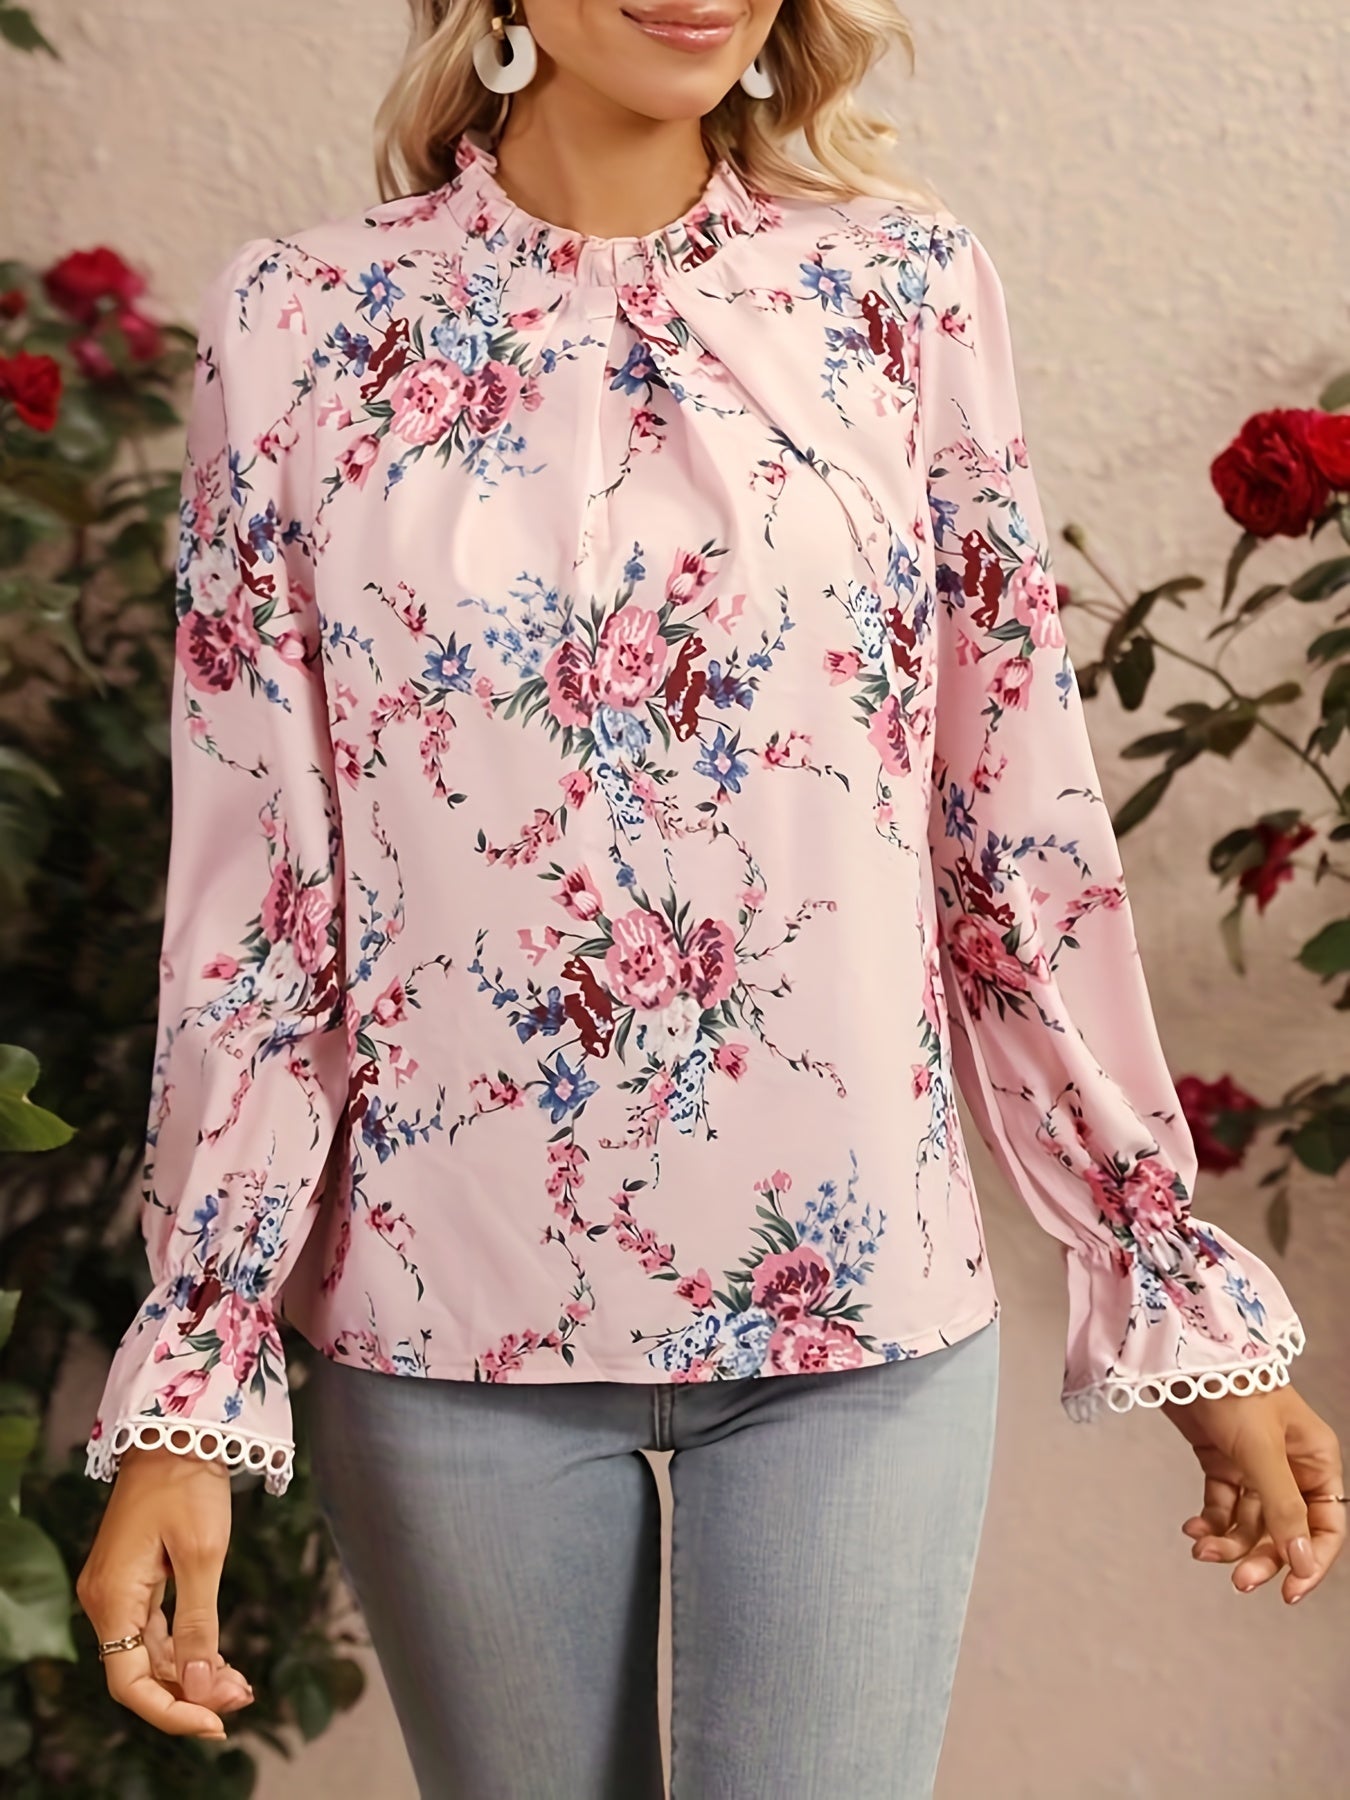 Floral Print Crochet Trim Blouse, Casual Long Sleeve Blouse For Spring & Fall, Women's Clothing